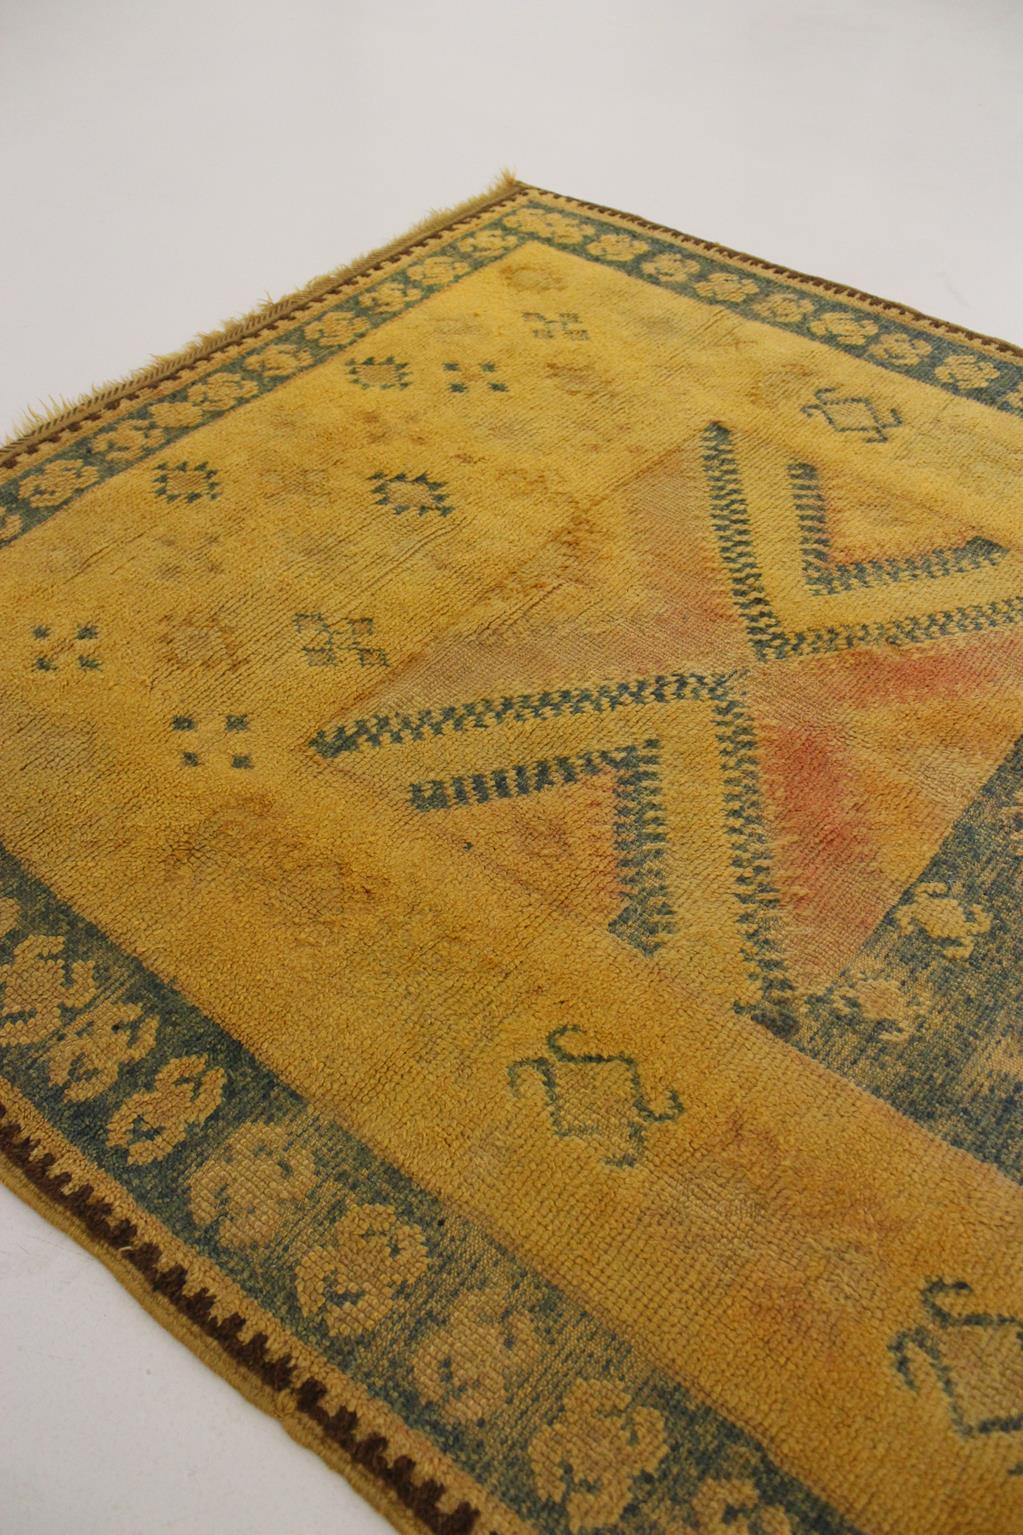 Vintage Moroccan Taznakht rug - Yellow/blue - 4.3x7.6feet / 134x234cm For Sale 7